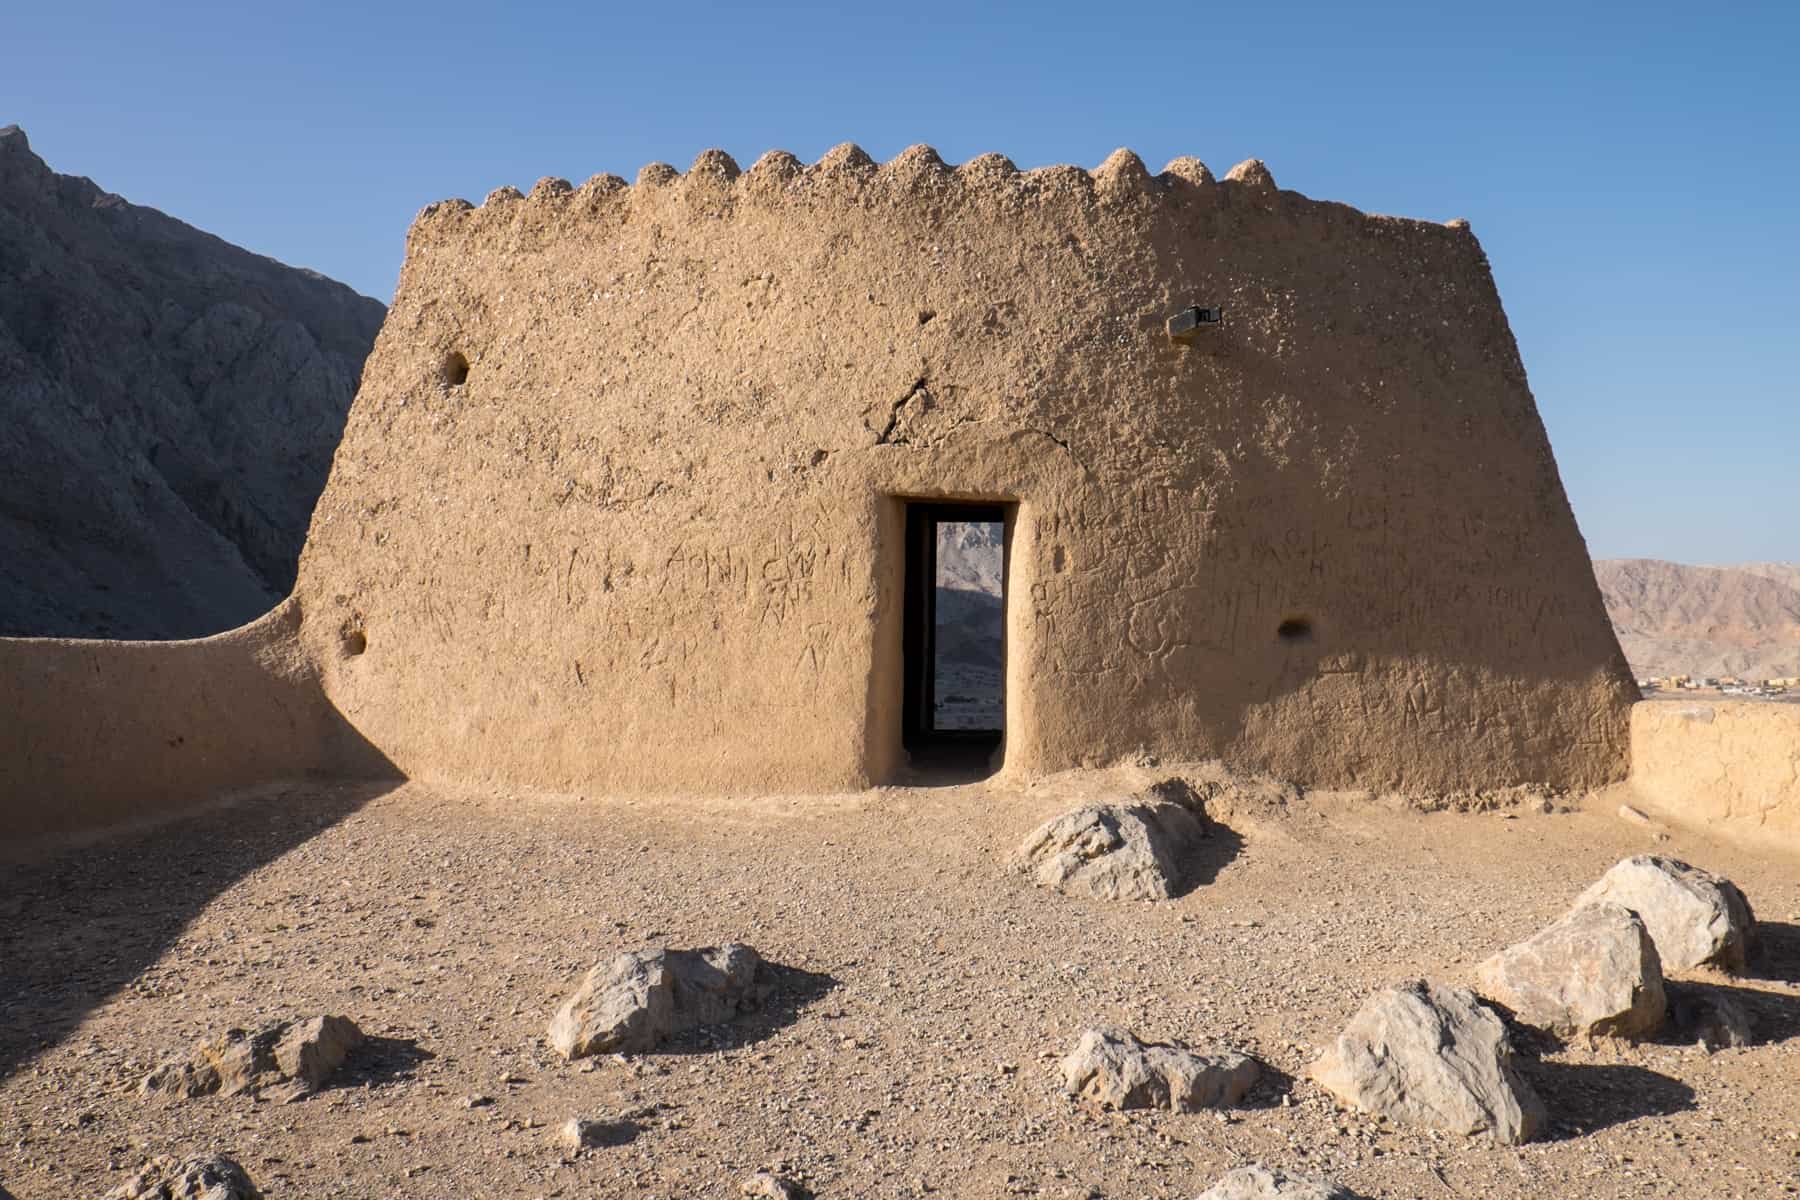 The golden castle-like structure of Dhayah Fort in Ras Al Khaimah, that sits elevated on dusty grounds and surrounded by mountains.